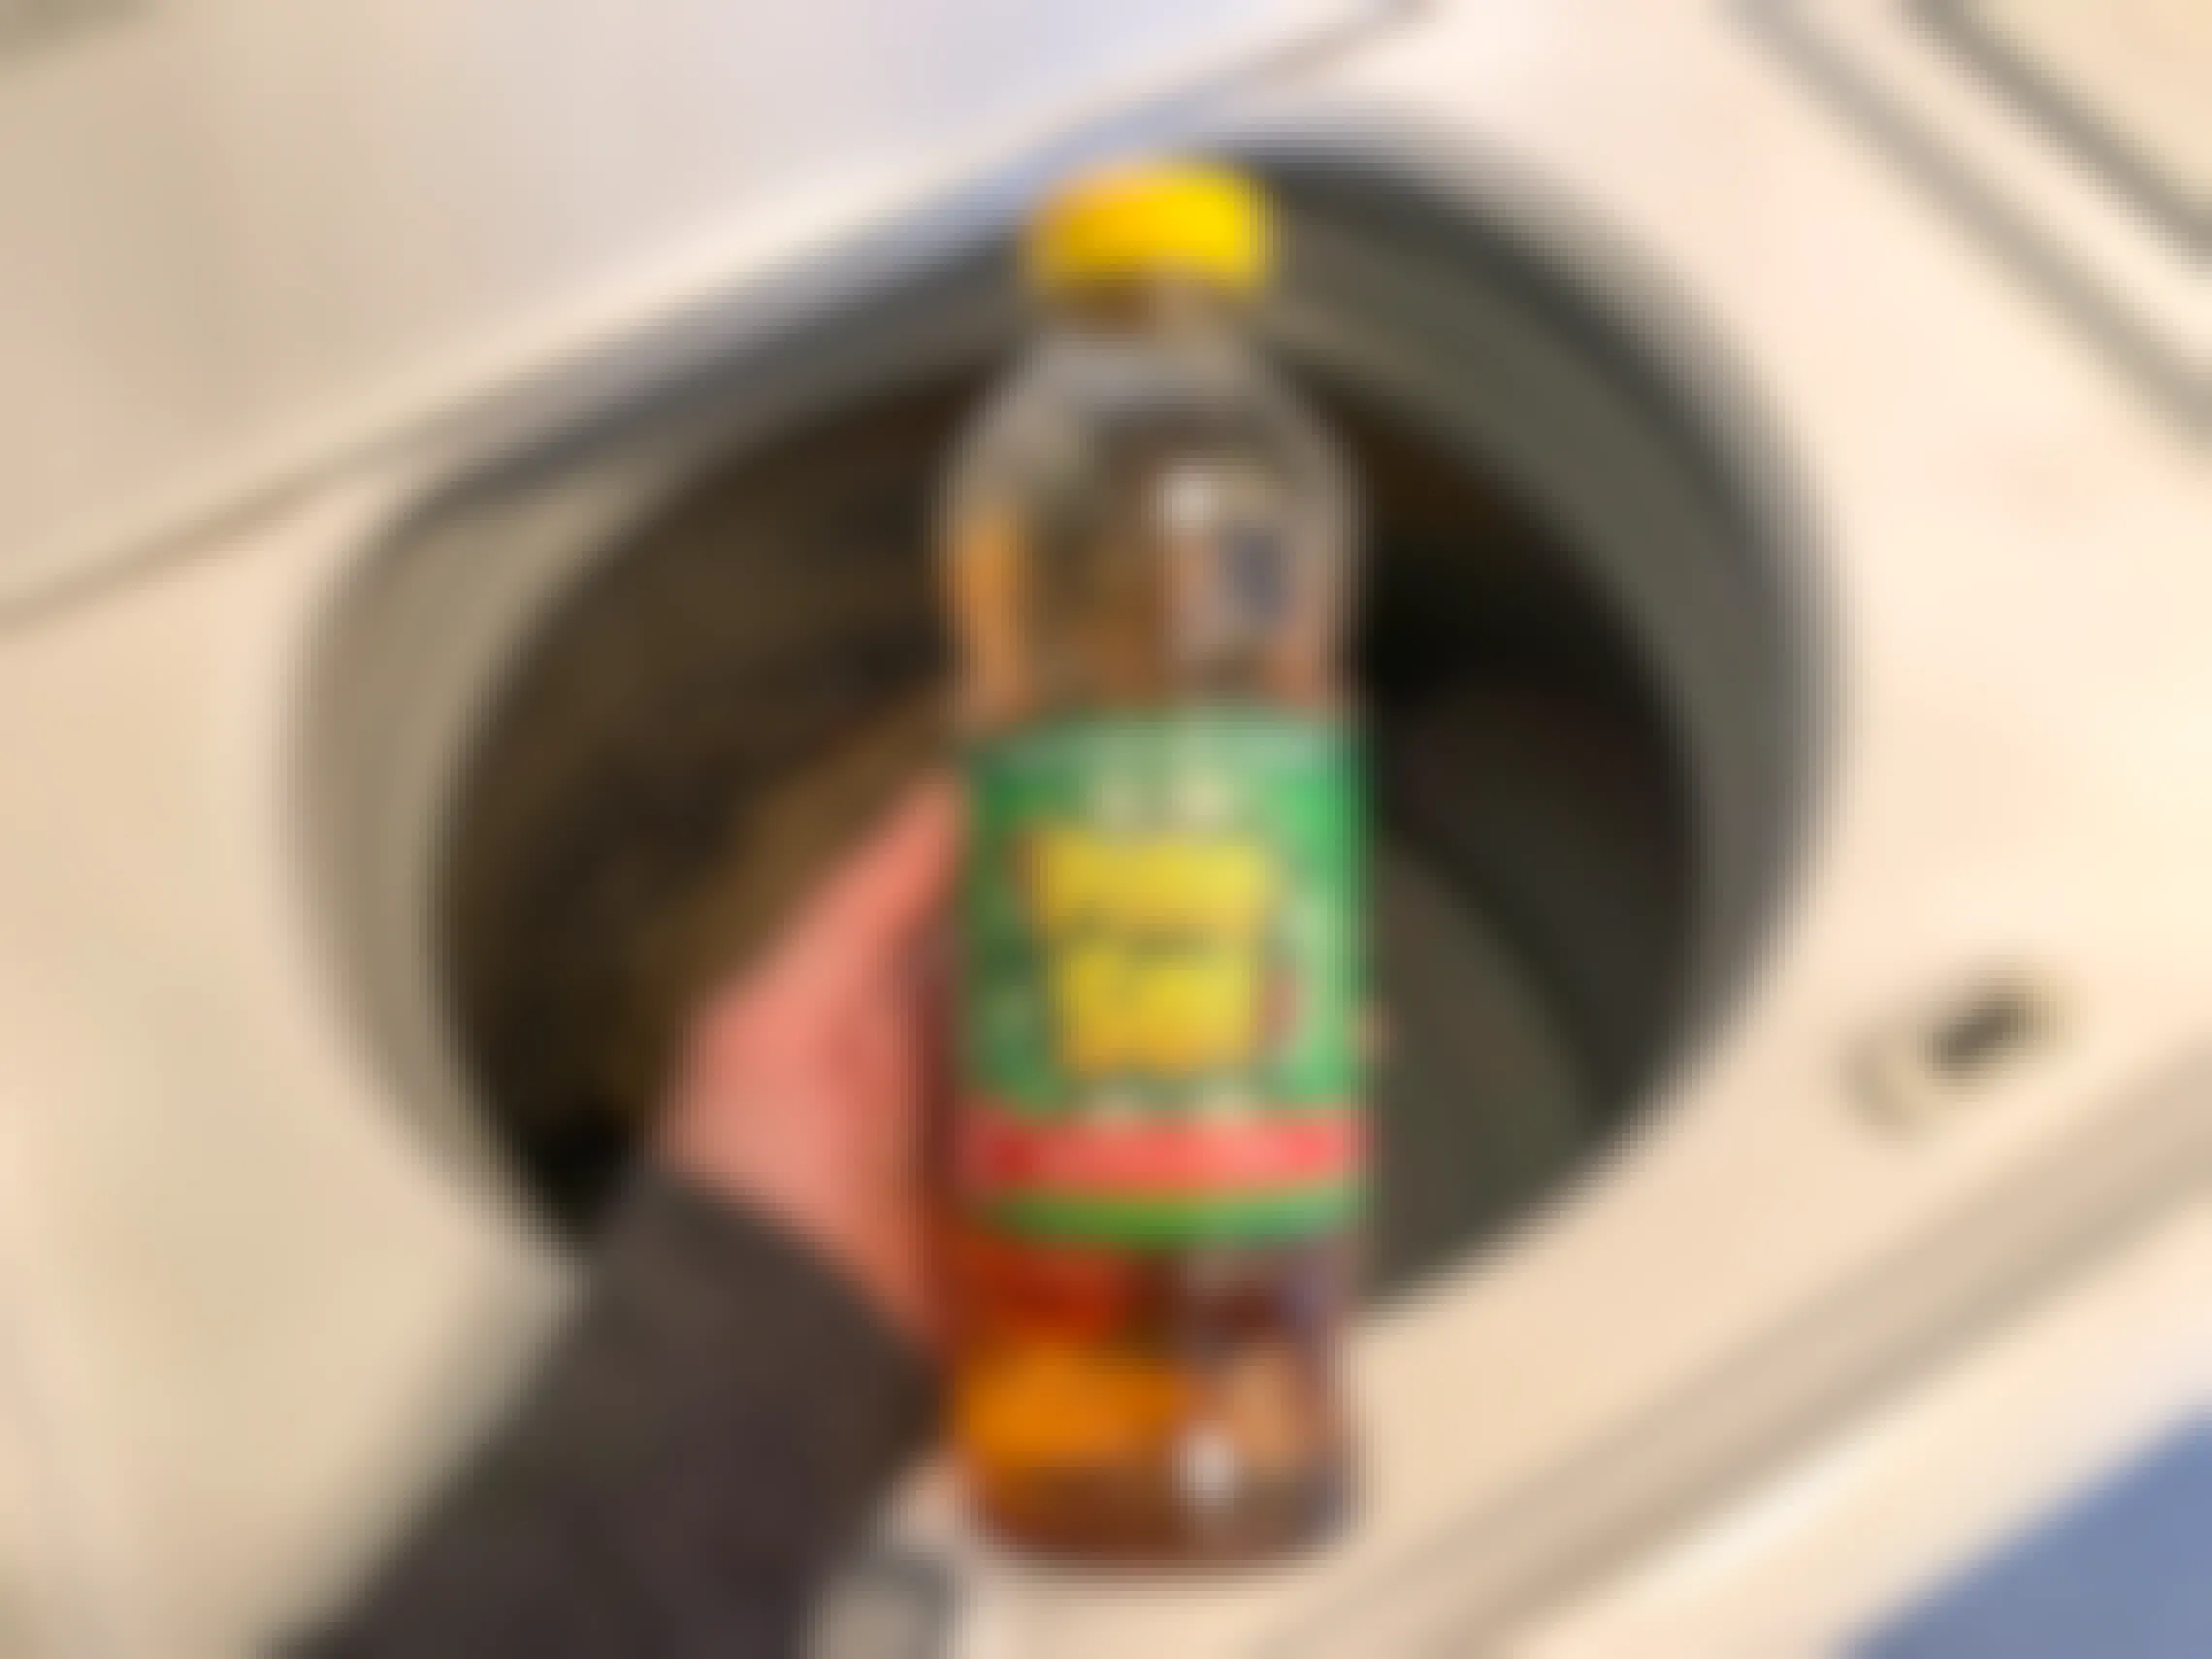 I bottle of Pine Sol over the of a top load washing machine.